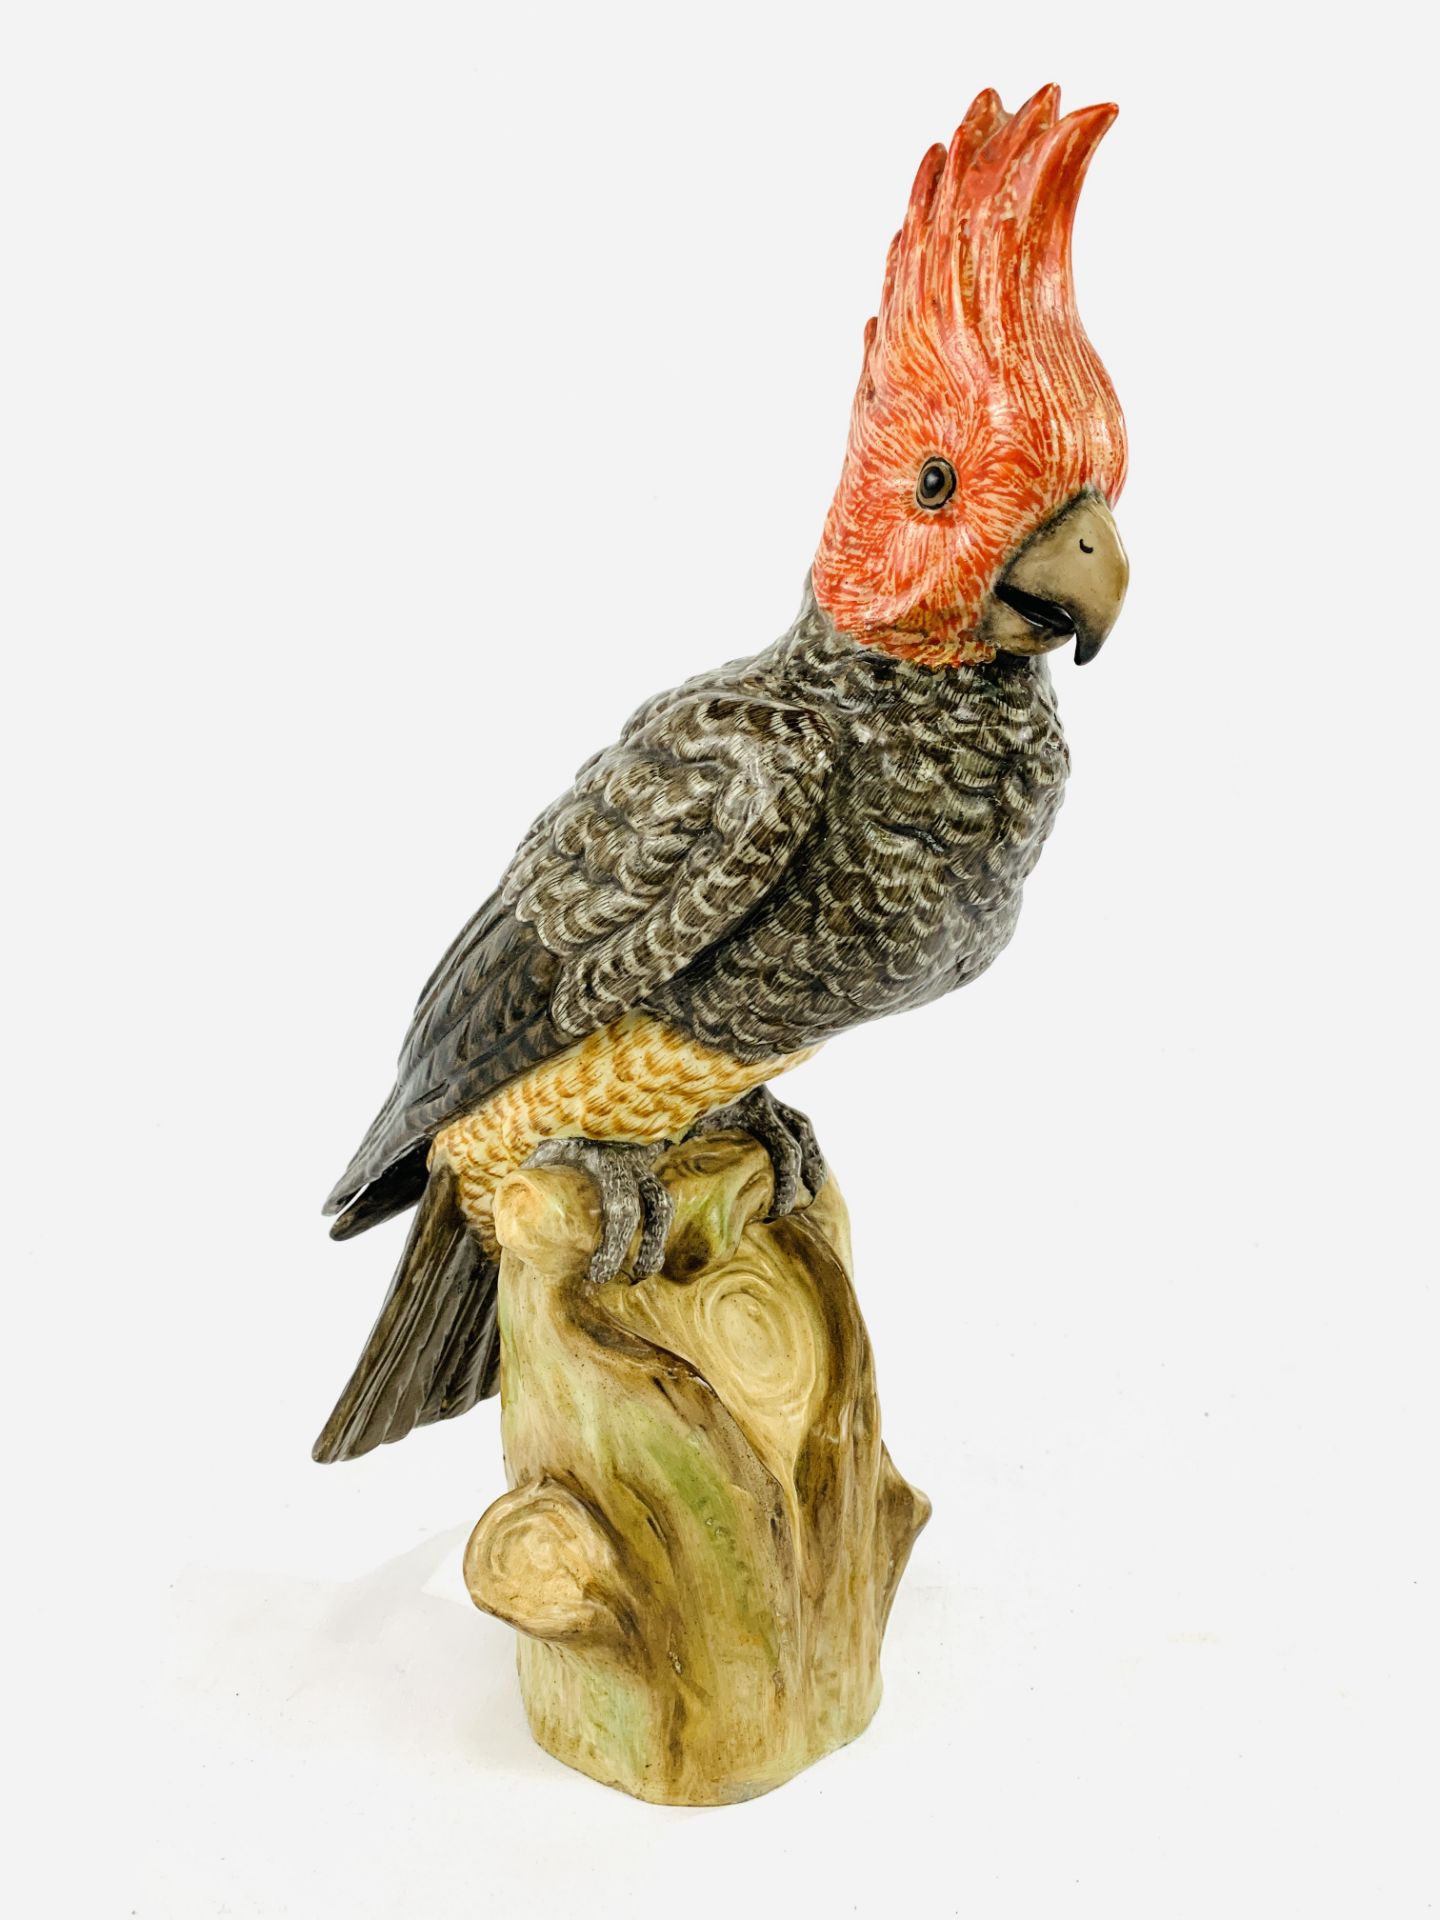 Ernst Bohne, Rudolstadt Thuringia / Dresden large grey and red cockatoo, circa 1850's. - Image 2 of 3